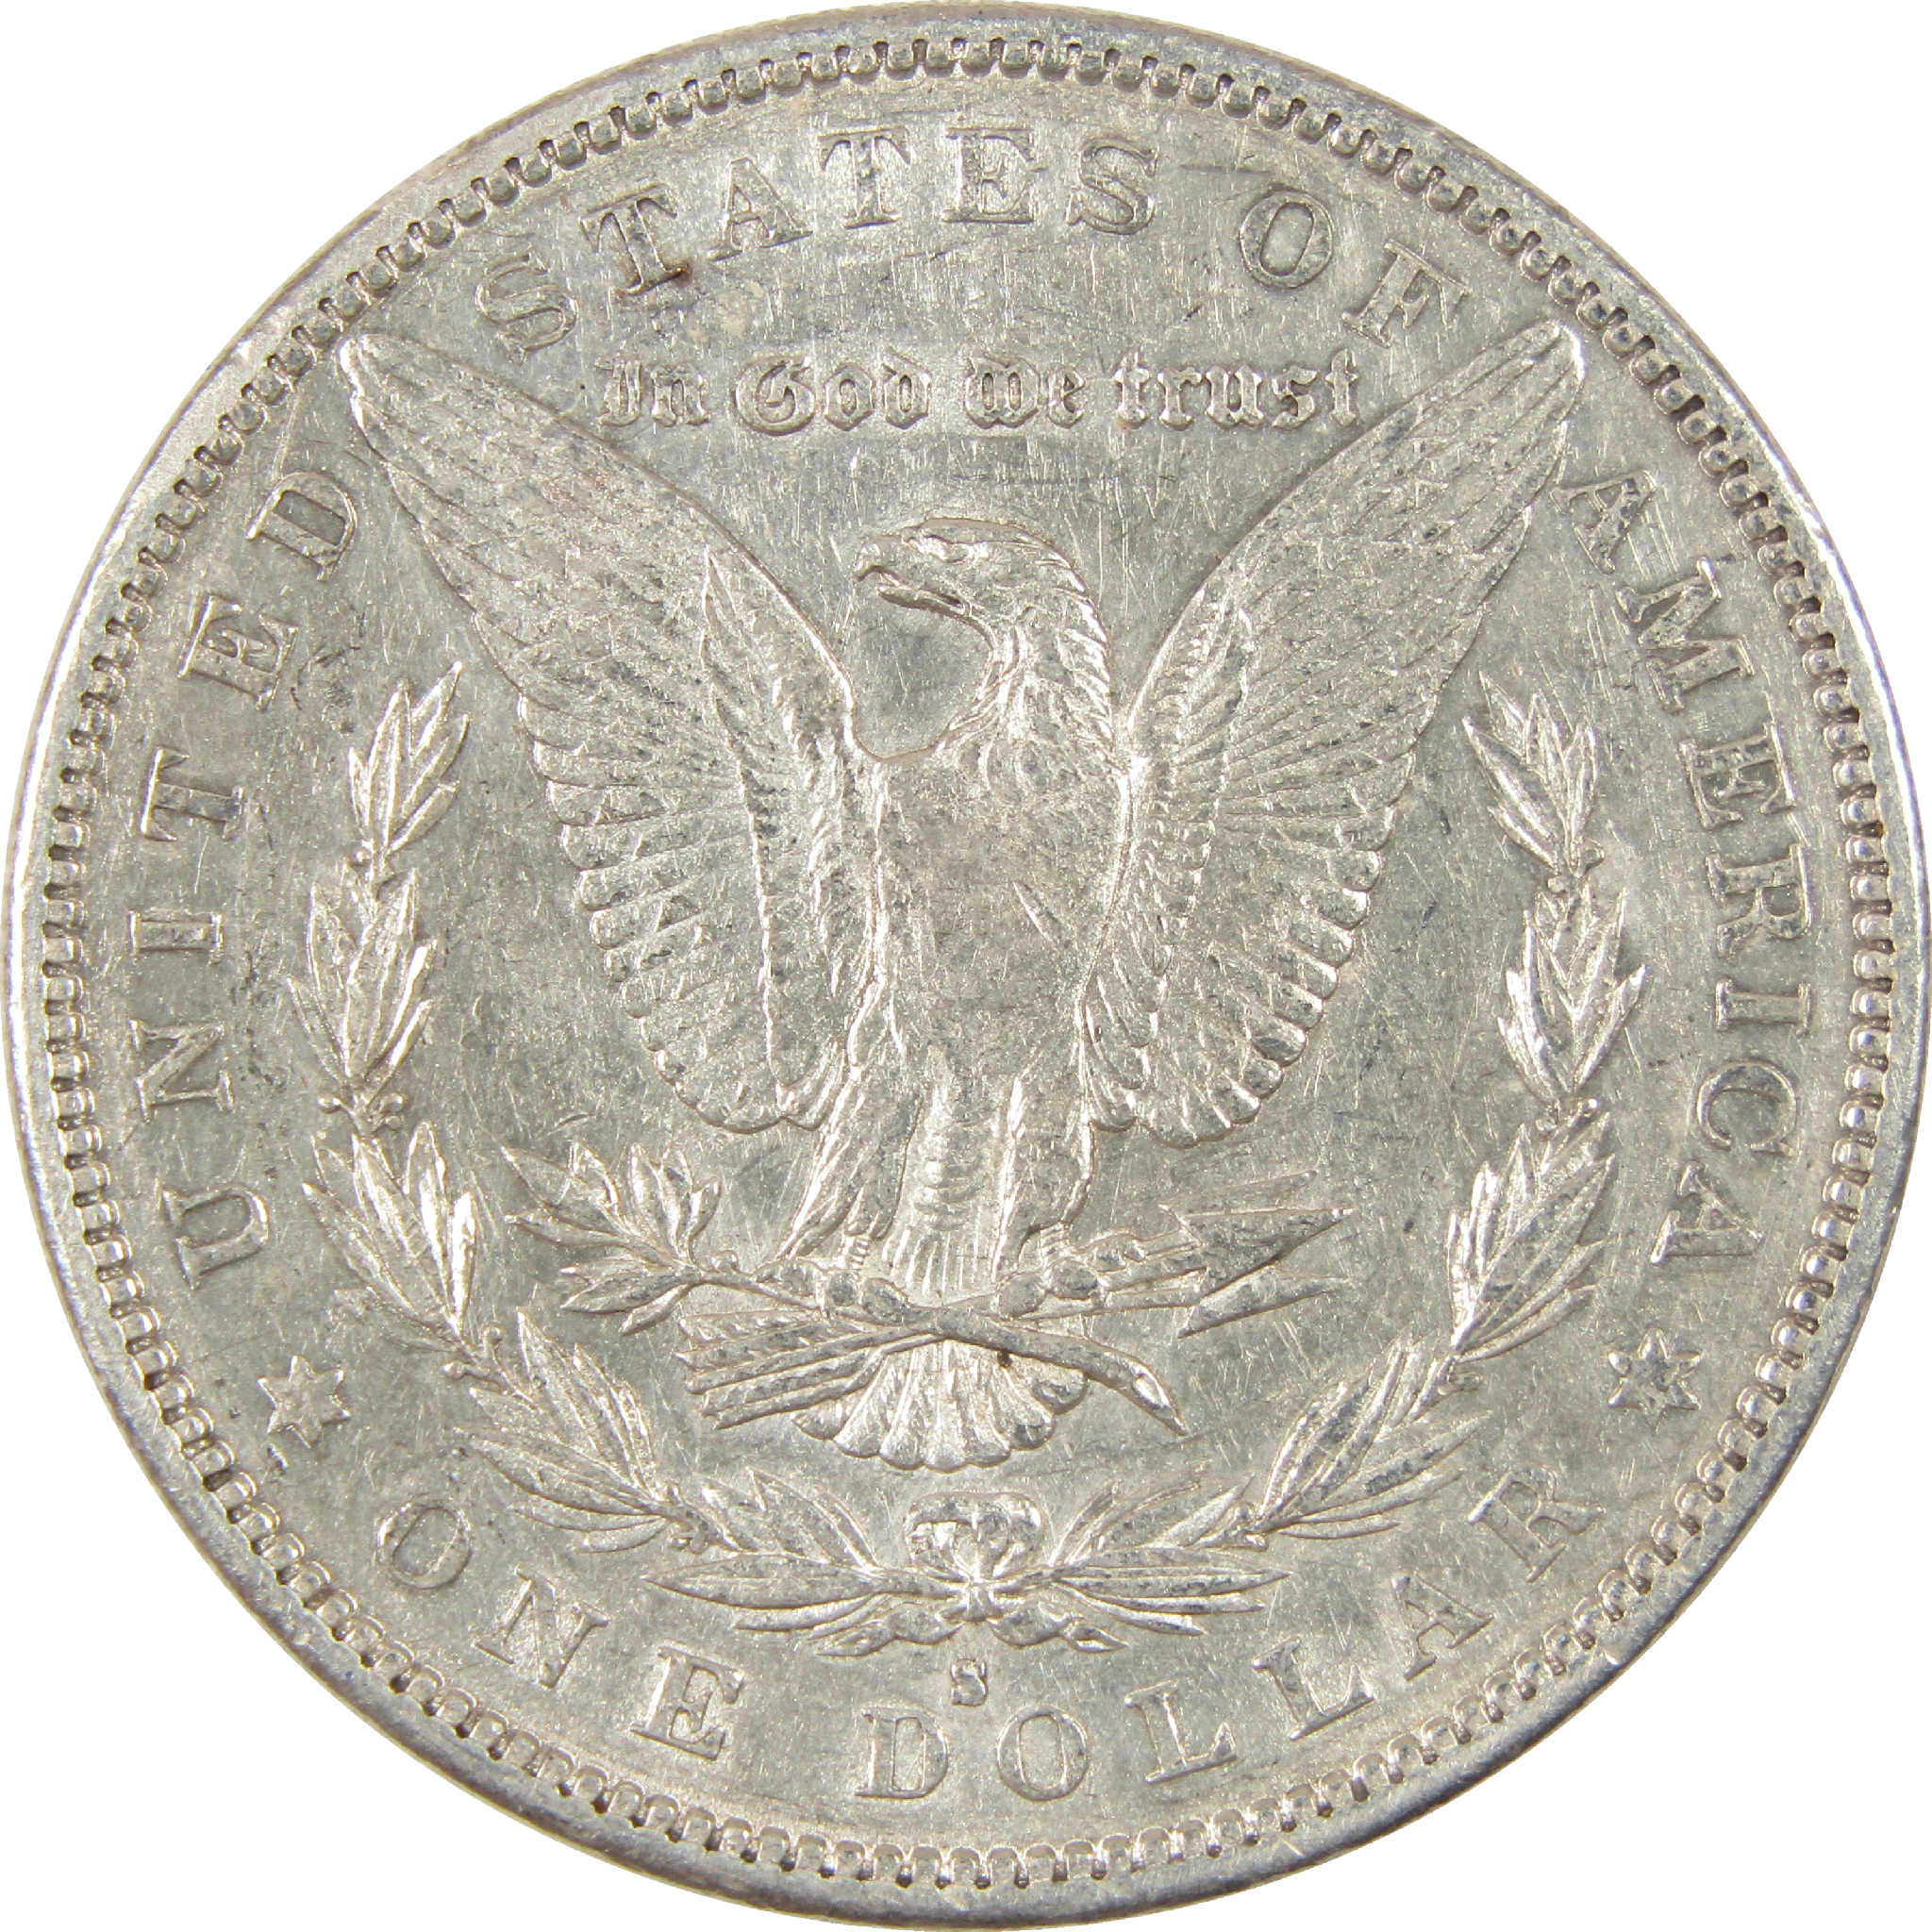 1883 S Morgan Dollar XF EF Extremely Fine Silver $1 Coin SKU:I11276 - Morgan coin - Morgan silver dollar - Morgan silver dollar for sale - Profile Coins &amp; Collectibles